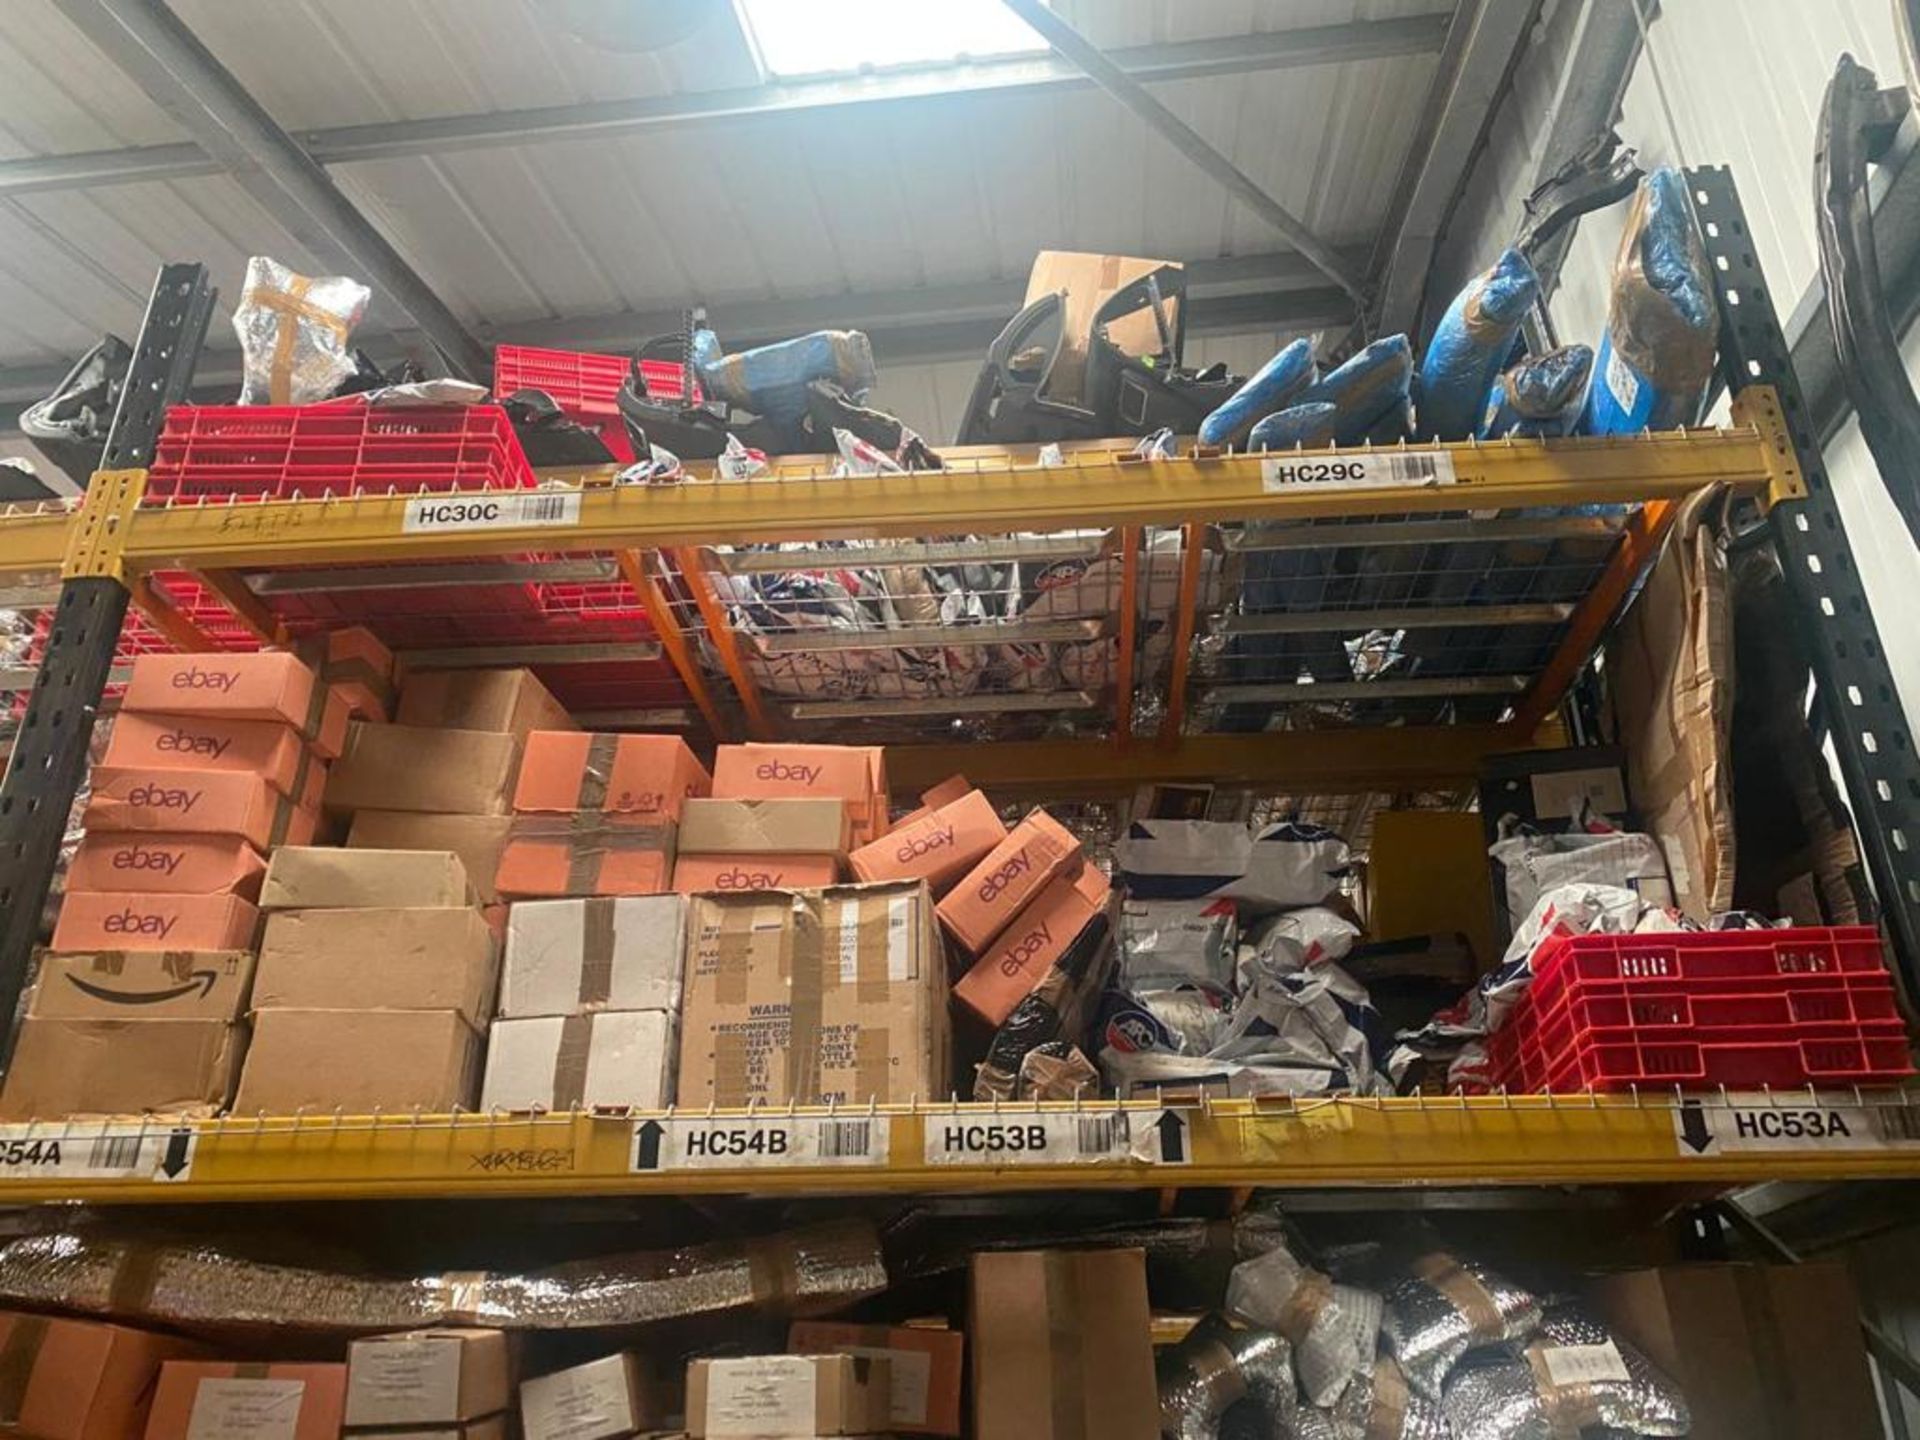 BULK ITEMS JOB LOT OF USED CAR PARTS - £350K ONGOING BUSINESS STOCK CLEARANCE FOR SALE! *NO VAT* - Image 82 of 95